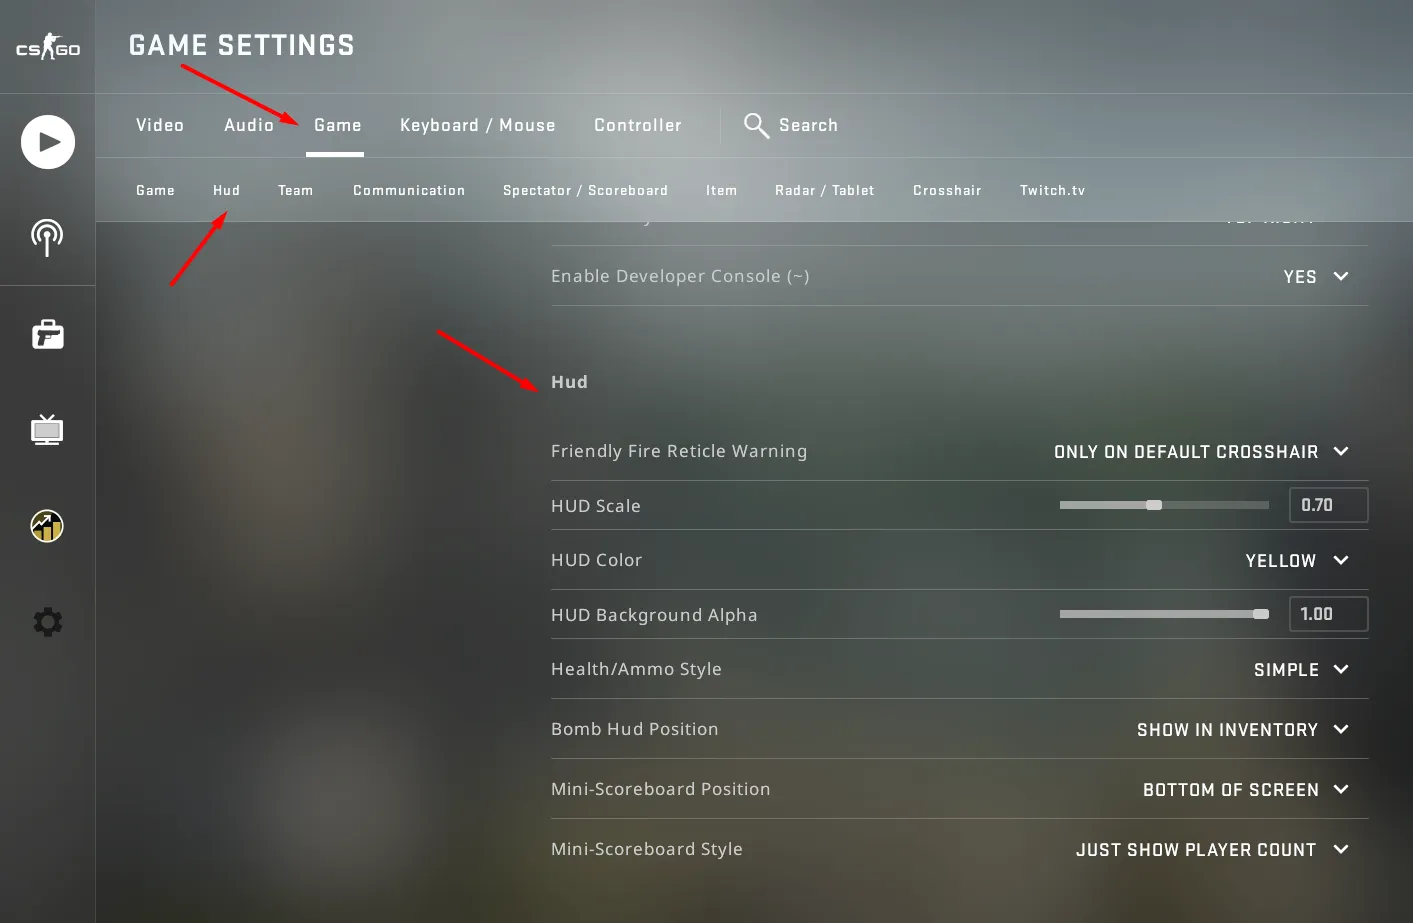 How to change HUD in settings